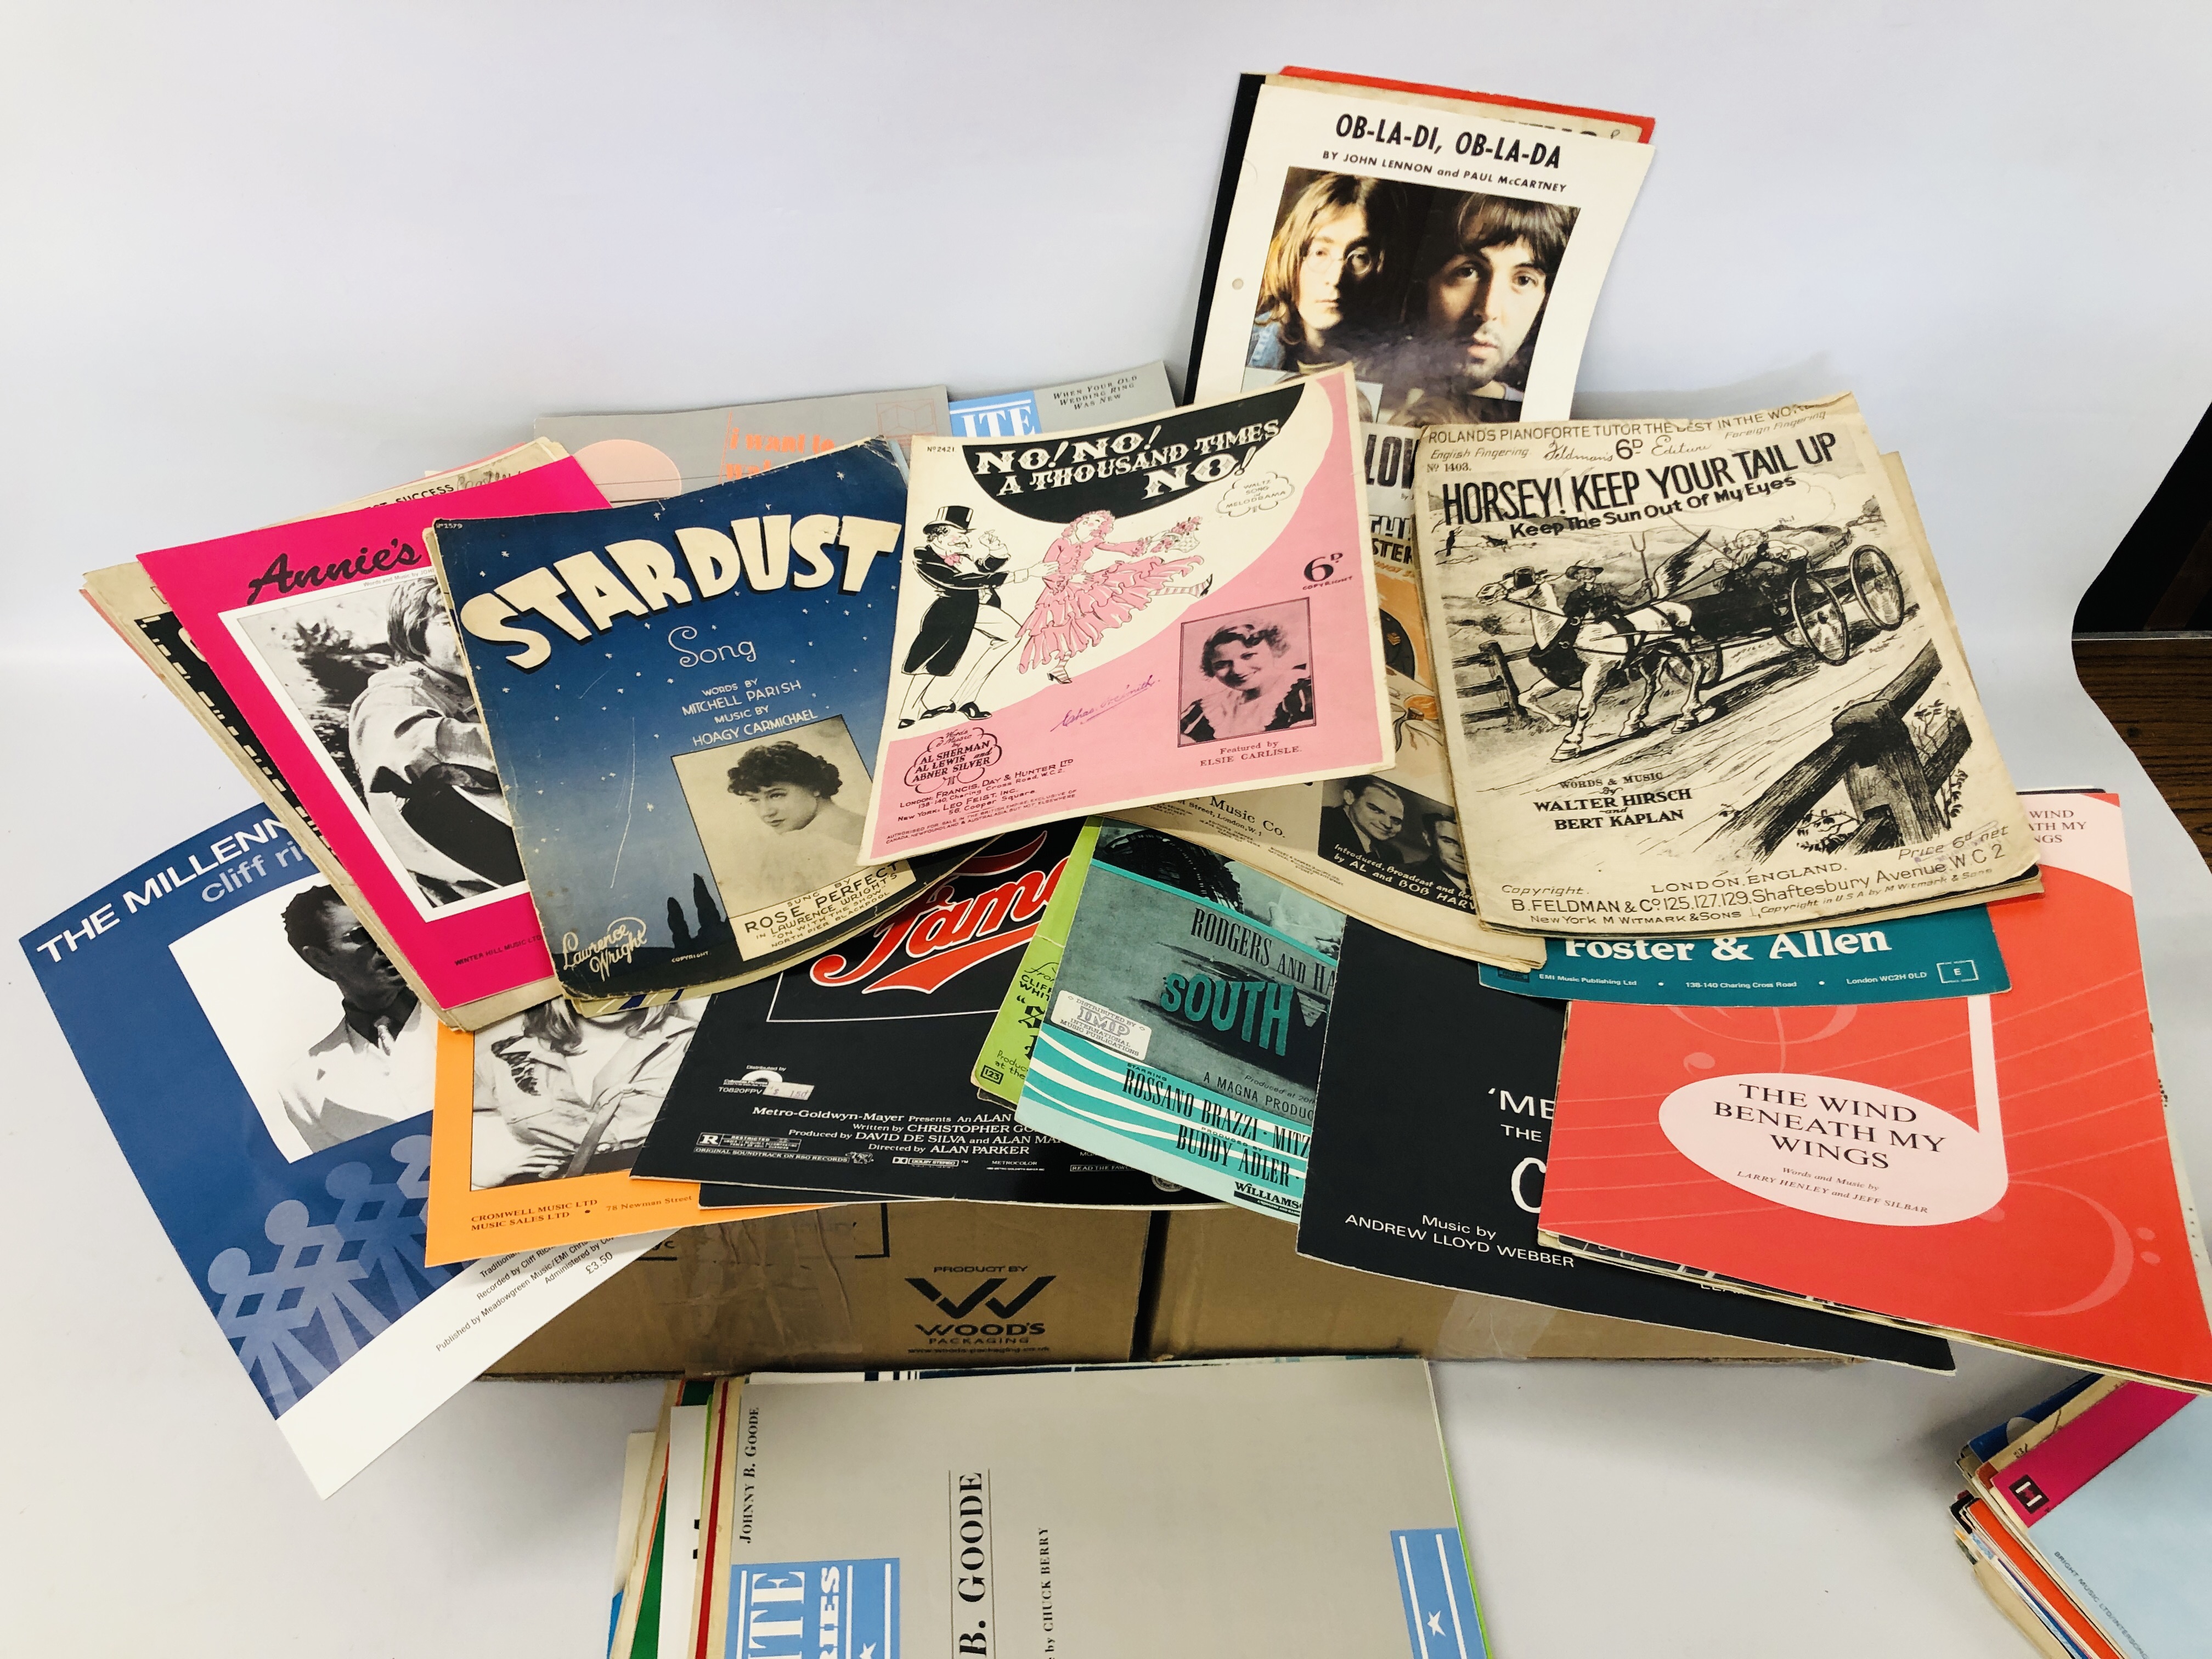 TWO BOXES CONTAINING SHEET MUSIC TO INCLUDE MAINLY POPULAR MUSIC - BEATLES, ETC. - Image 3 of 4